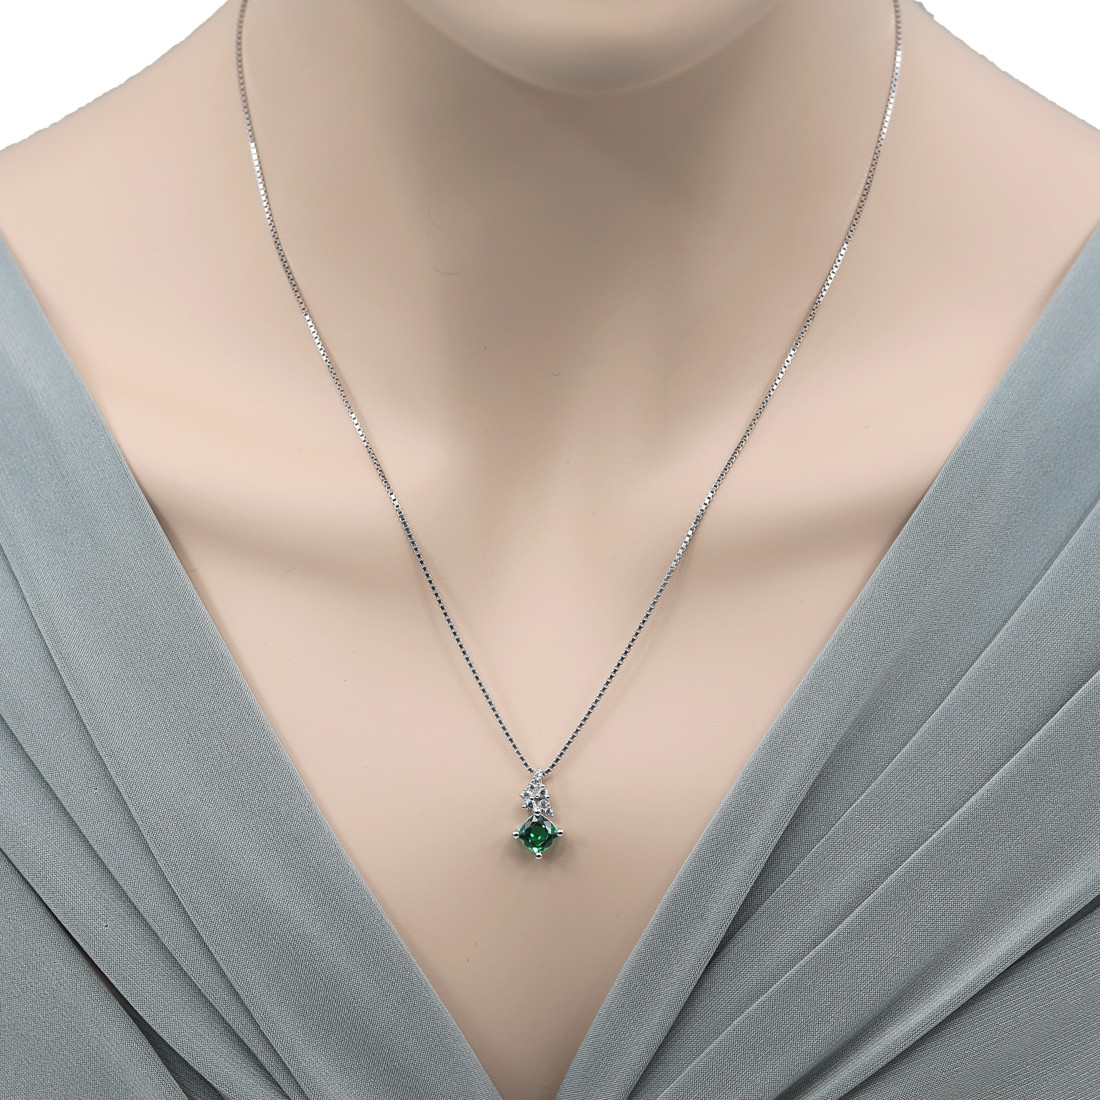 0.5 ct Pear Shape Green Simulated Emerald Pendant Necklace in Sterling  Silver, 18